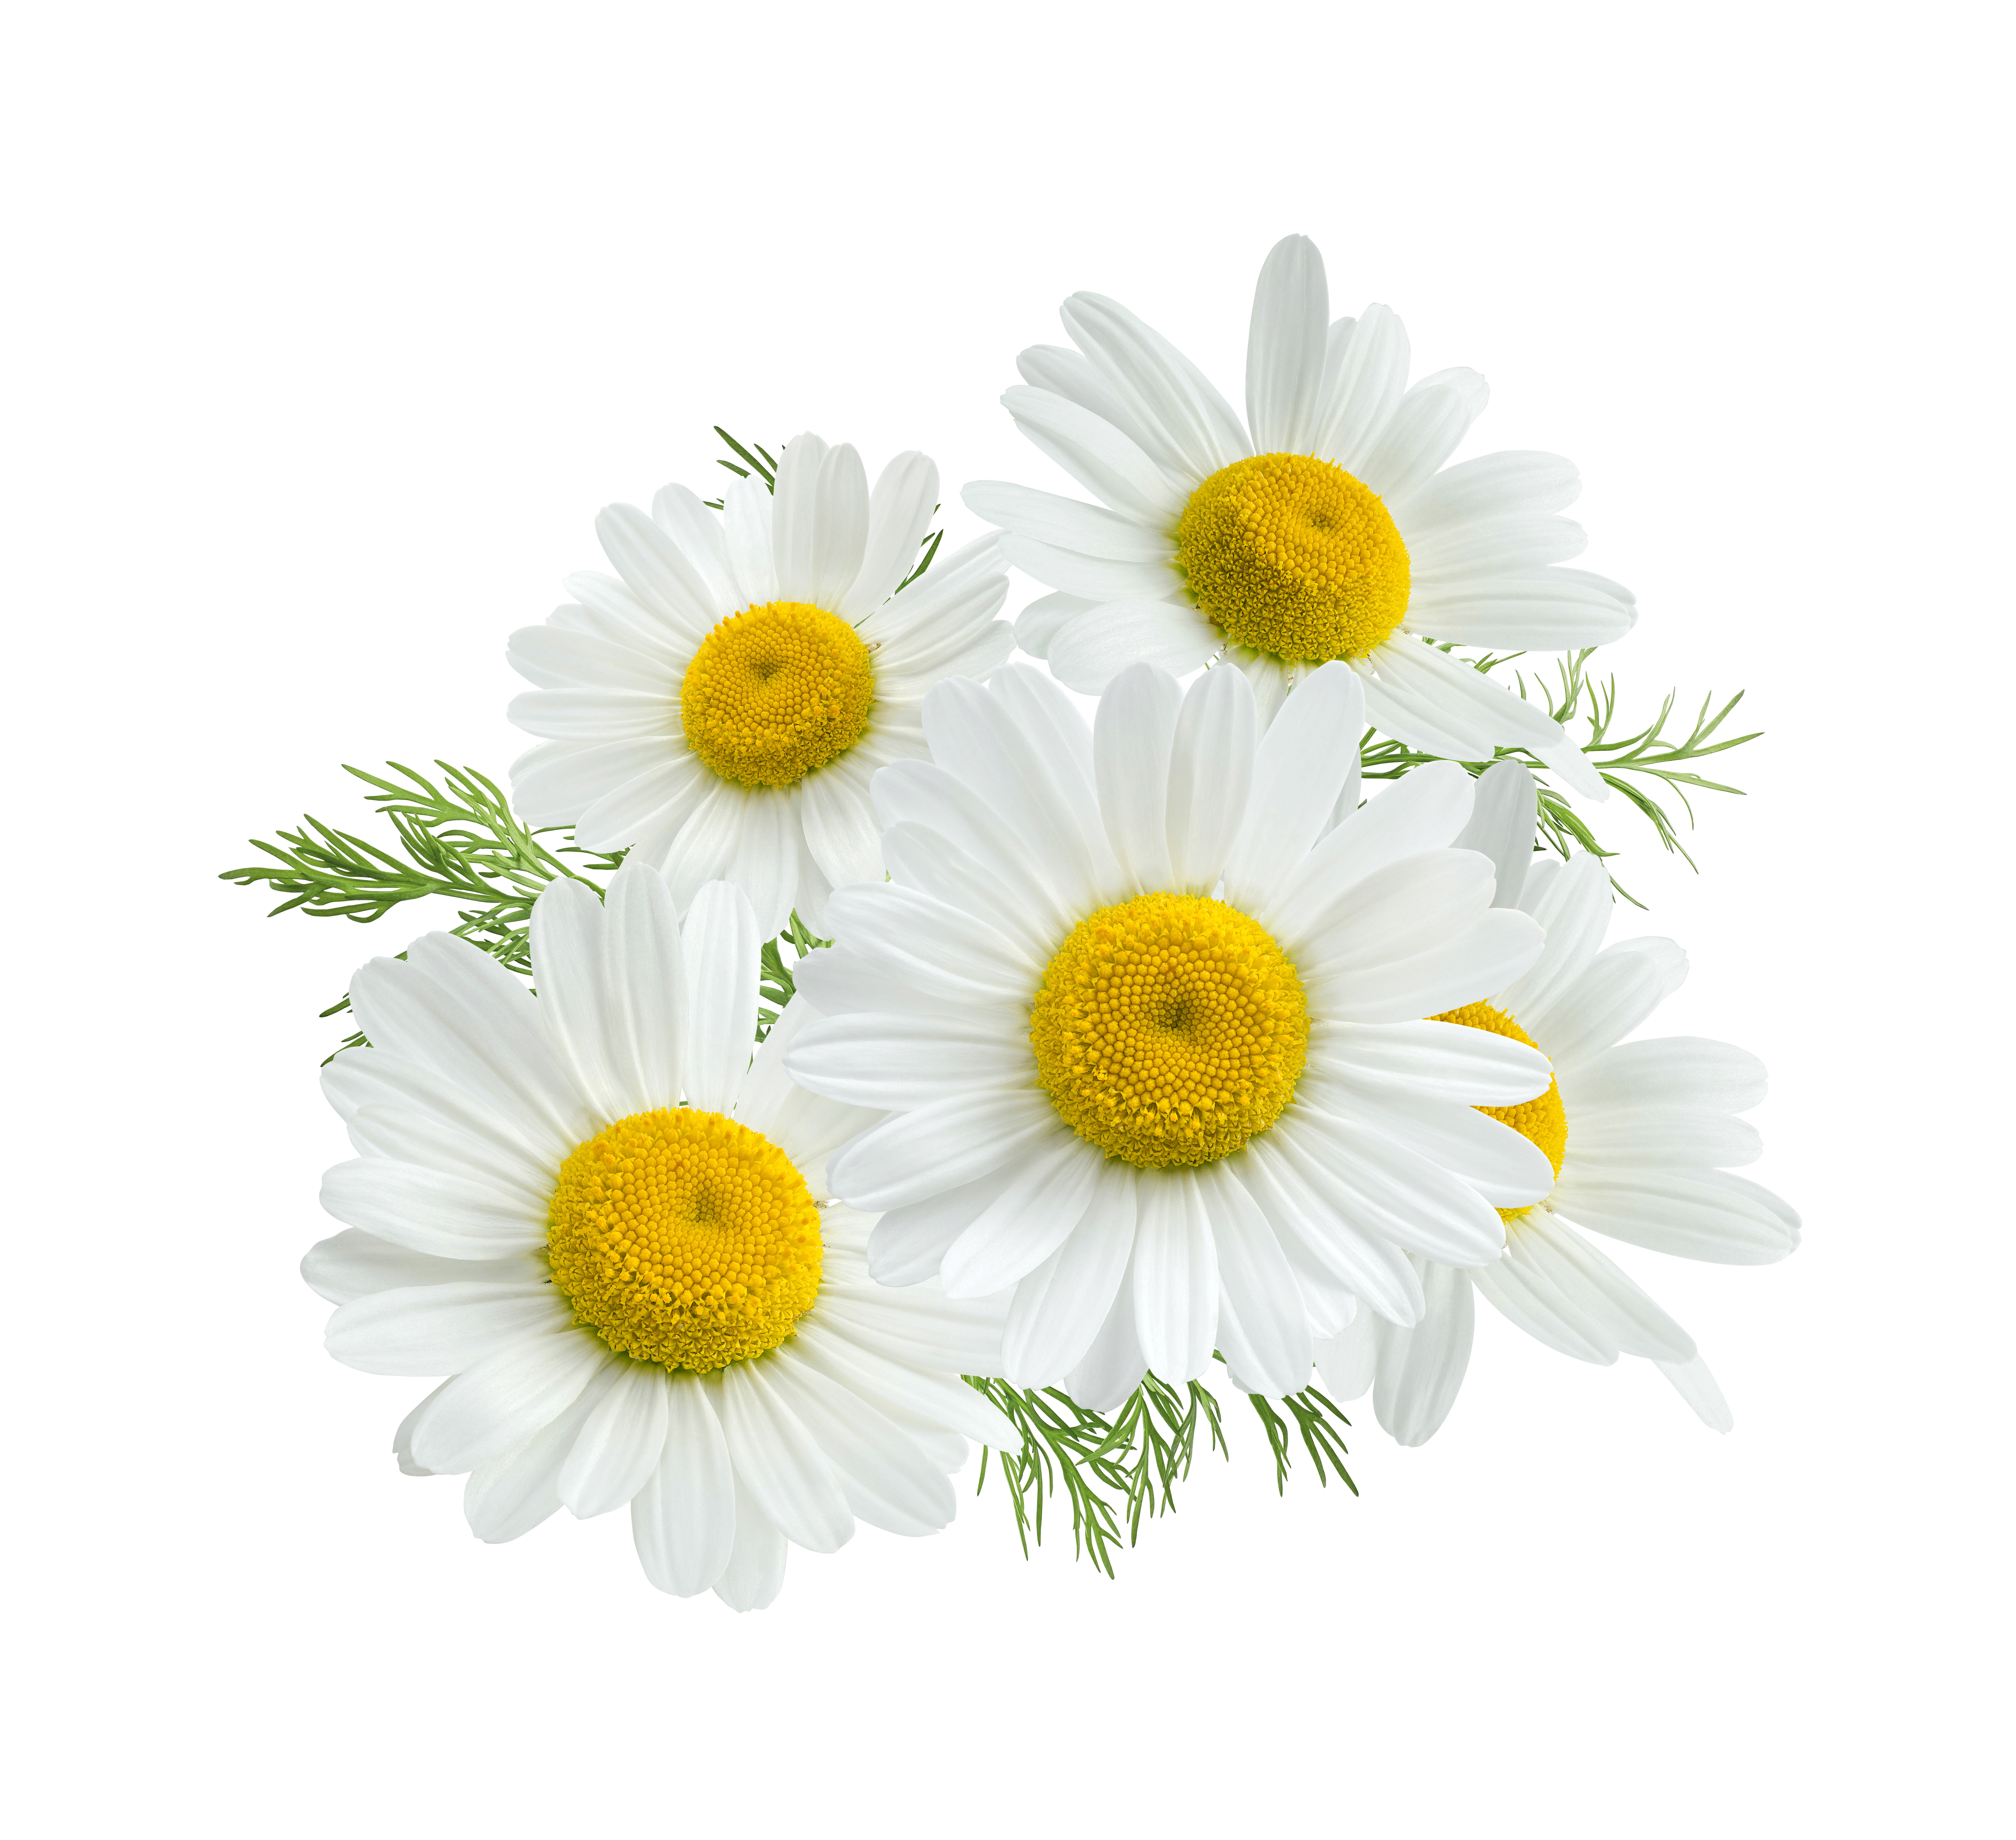 Camomile Face PNG